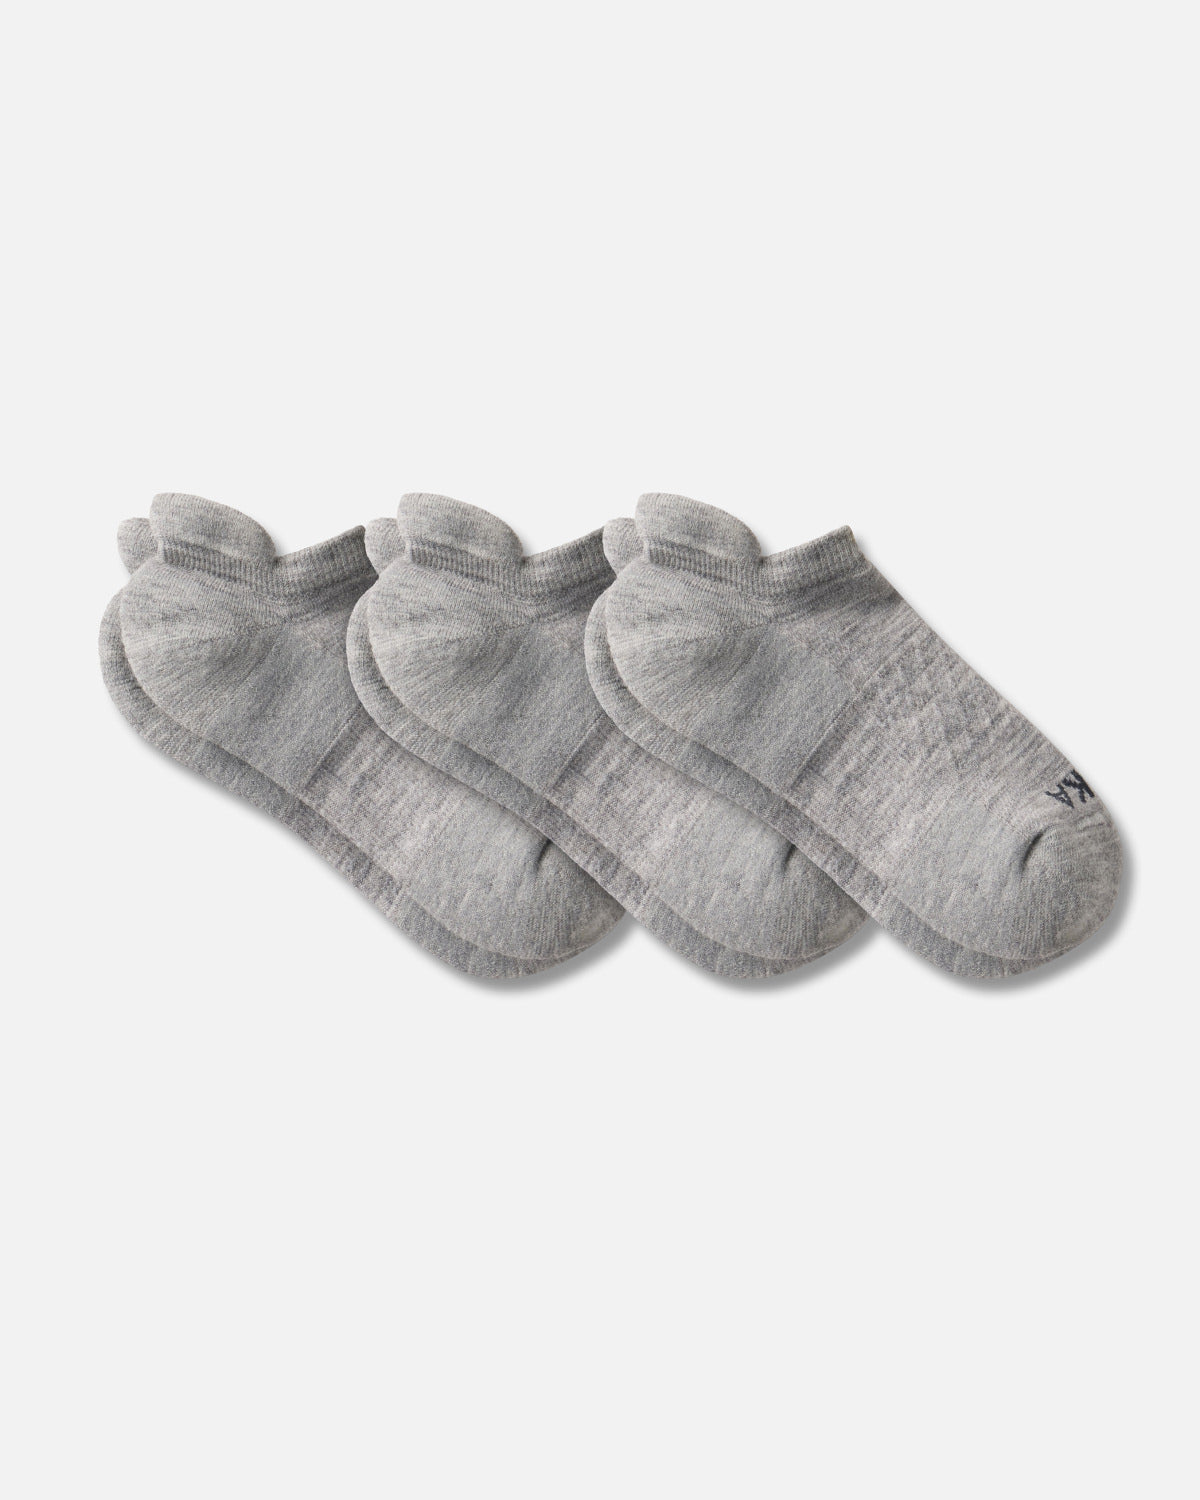 Alpaca Ankle Socks 3- Pack | Unisex, Soft, Breathable, Odor-Proof, Thermoregulating, Machine-Washable, Bamboo | IAndean Moss, M | Paka Apparel